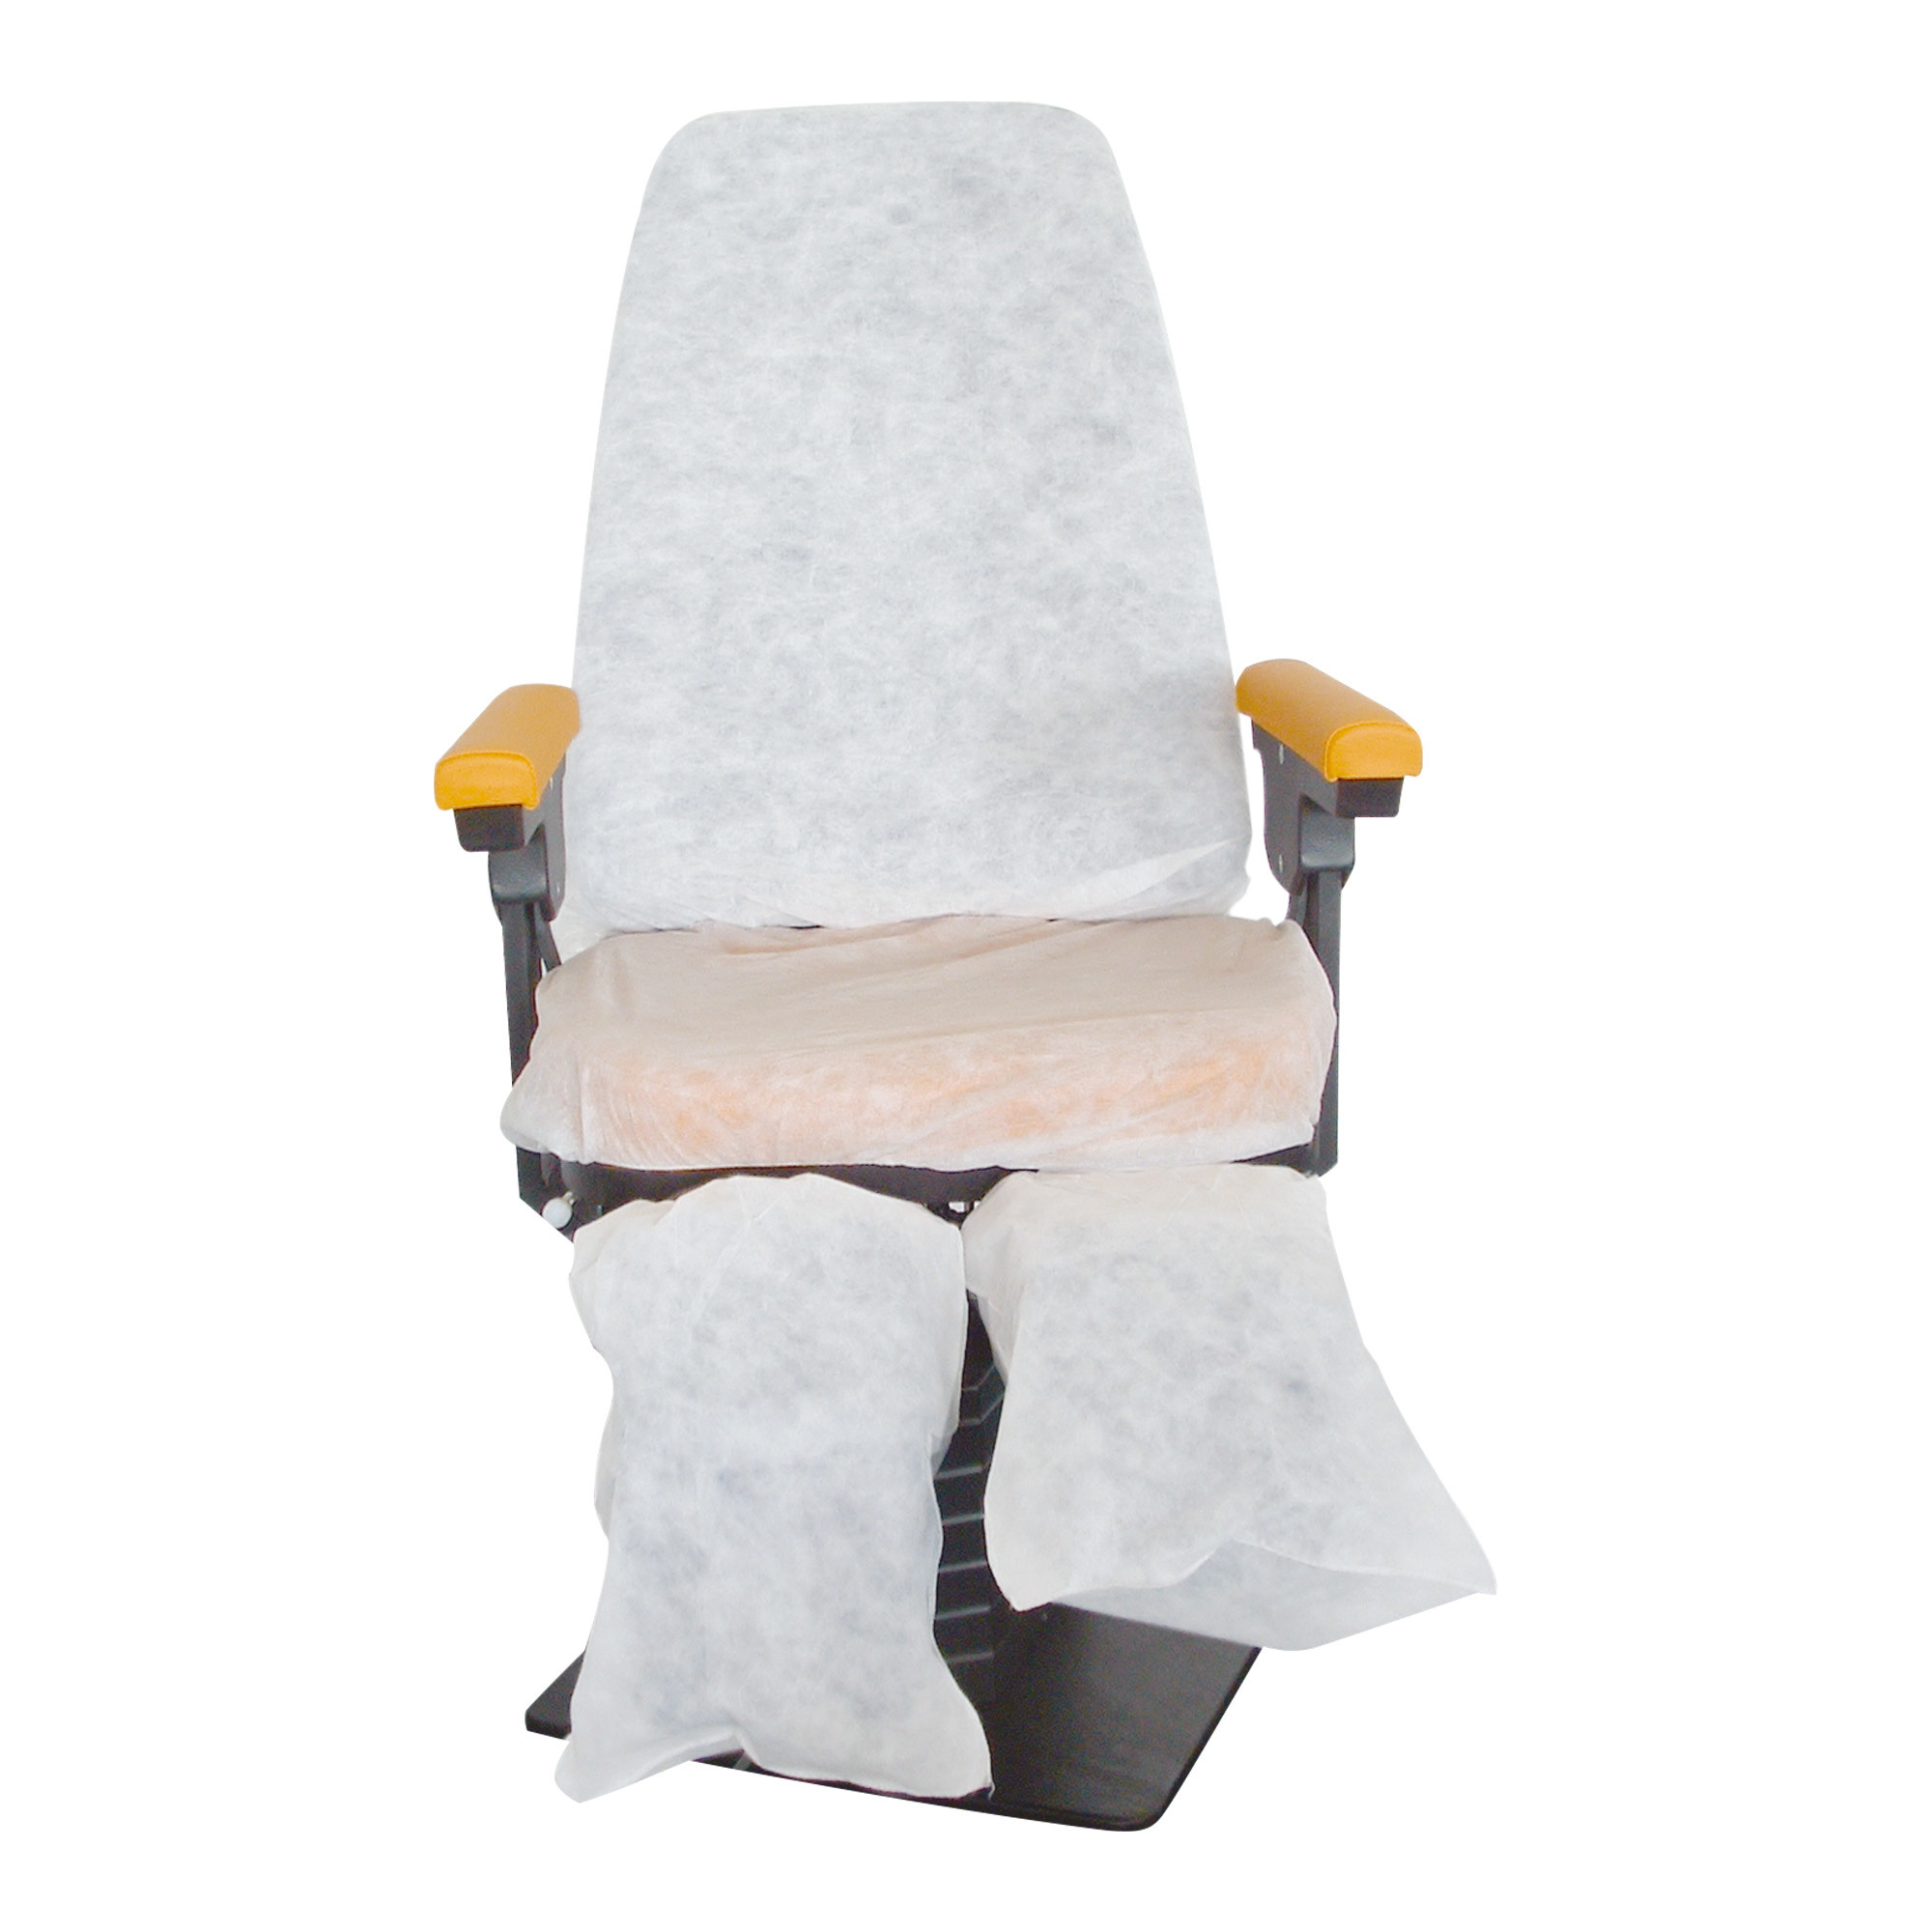 Disposable leg covers for armchair in TNT 20 pcs